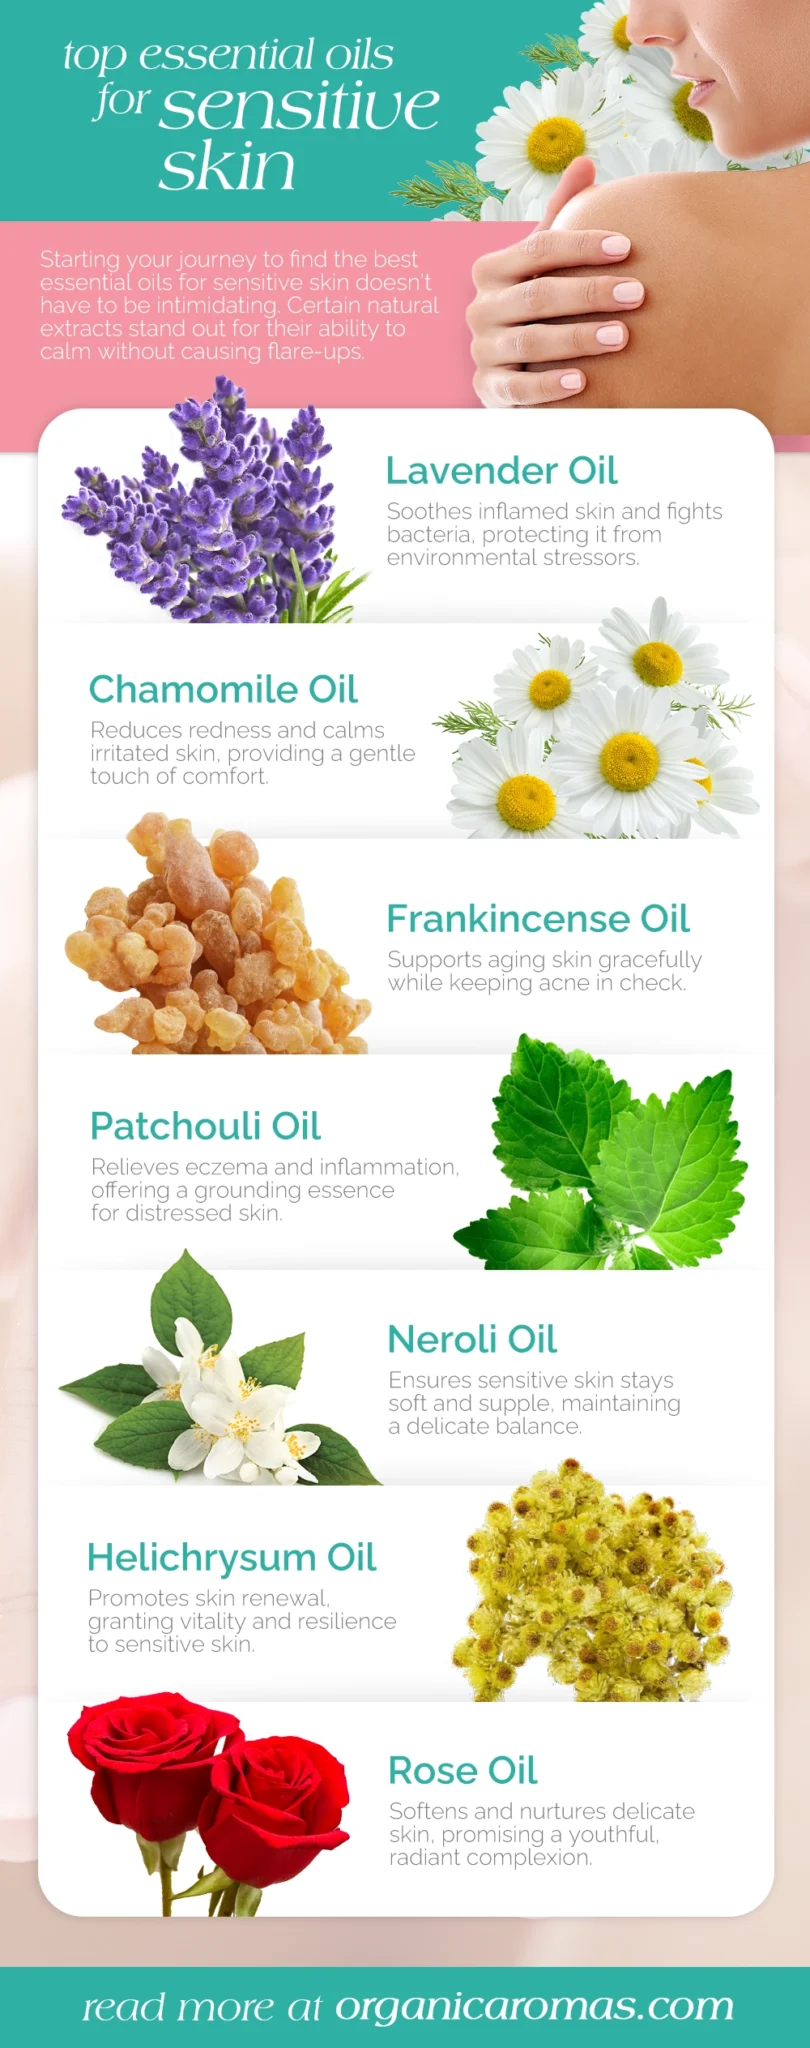 Top Essential Oils for Sensitive Skin Featured Image by Organic Aromas